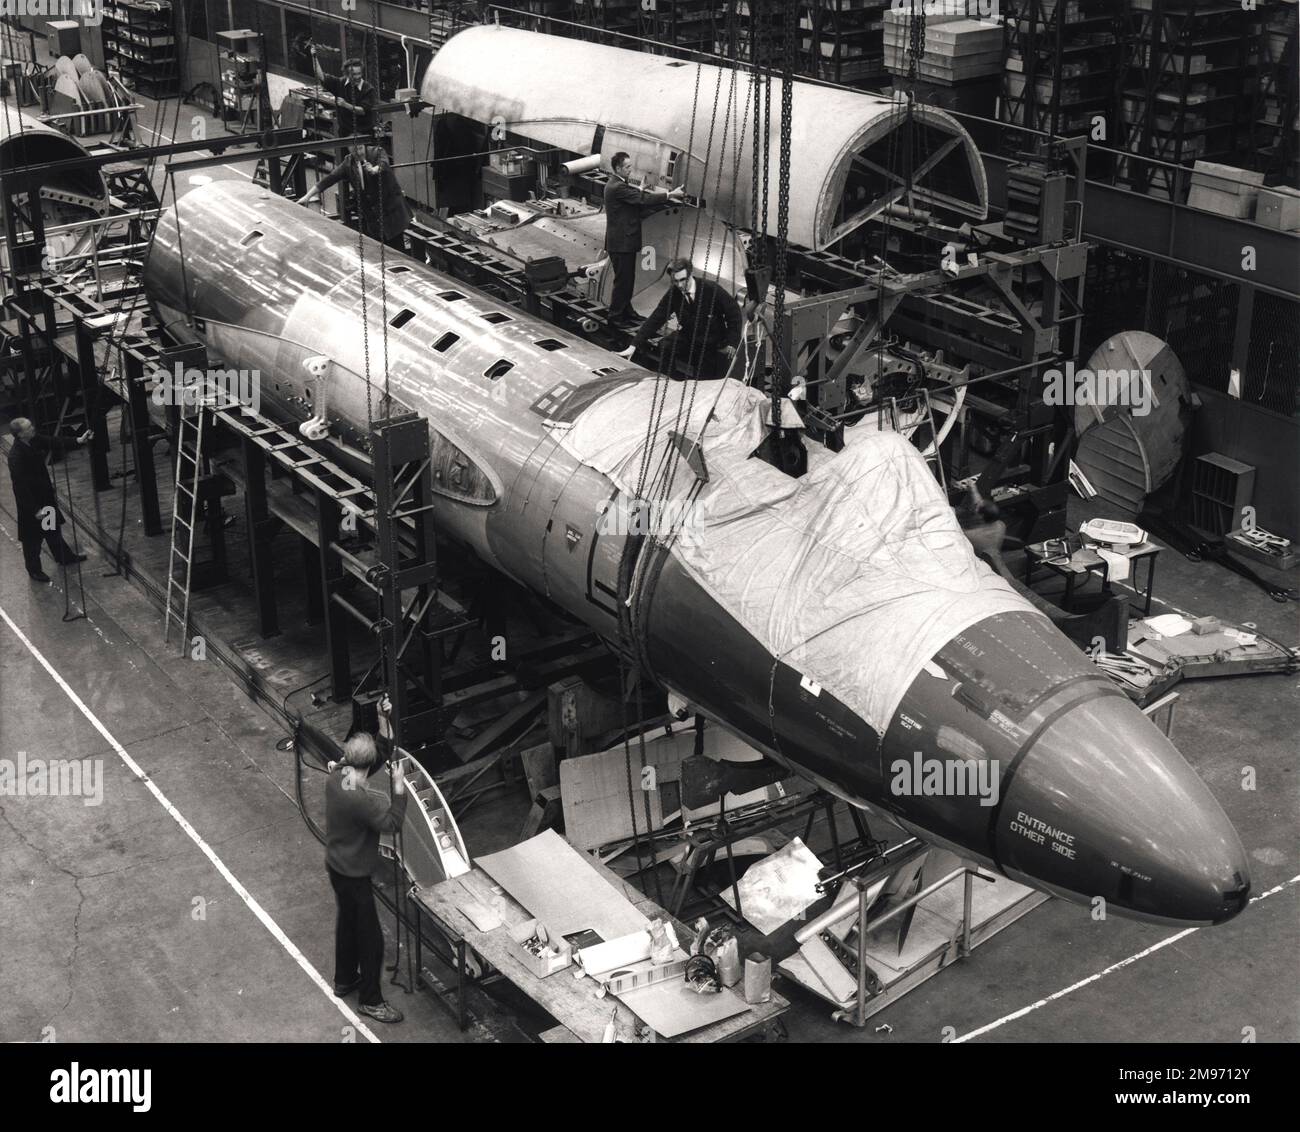 Ex-RAF English Electric Canberras being rebuilt for export at Samlesbury. November 1970. In the background the upper fuselage section is being replaced after comprehensive rebuild of the centre fuselage which includes fitment of a new main spar forging. The re-built fuselage in the foreground is being removed from its jig ready for the next stage. Stock Photo